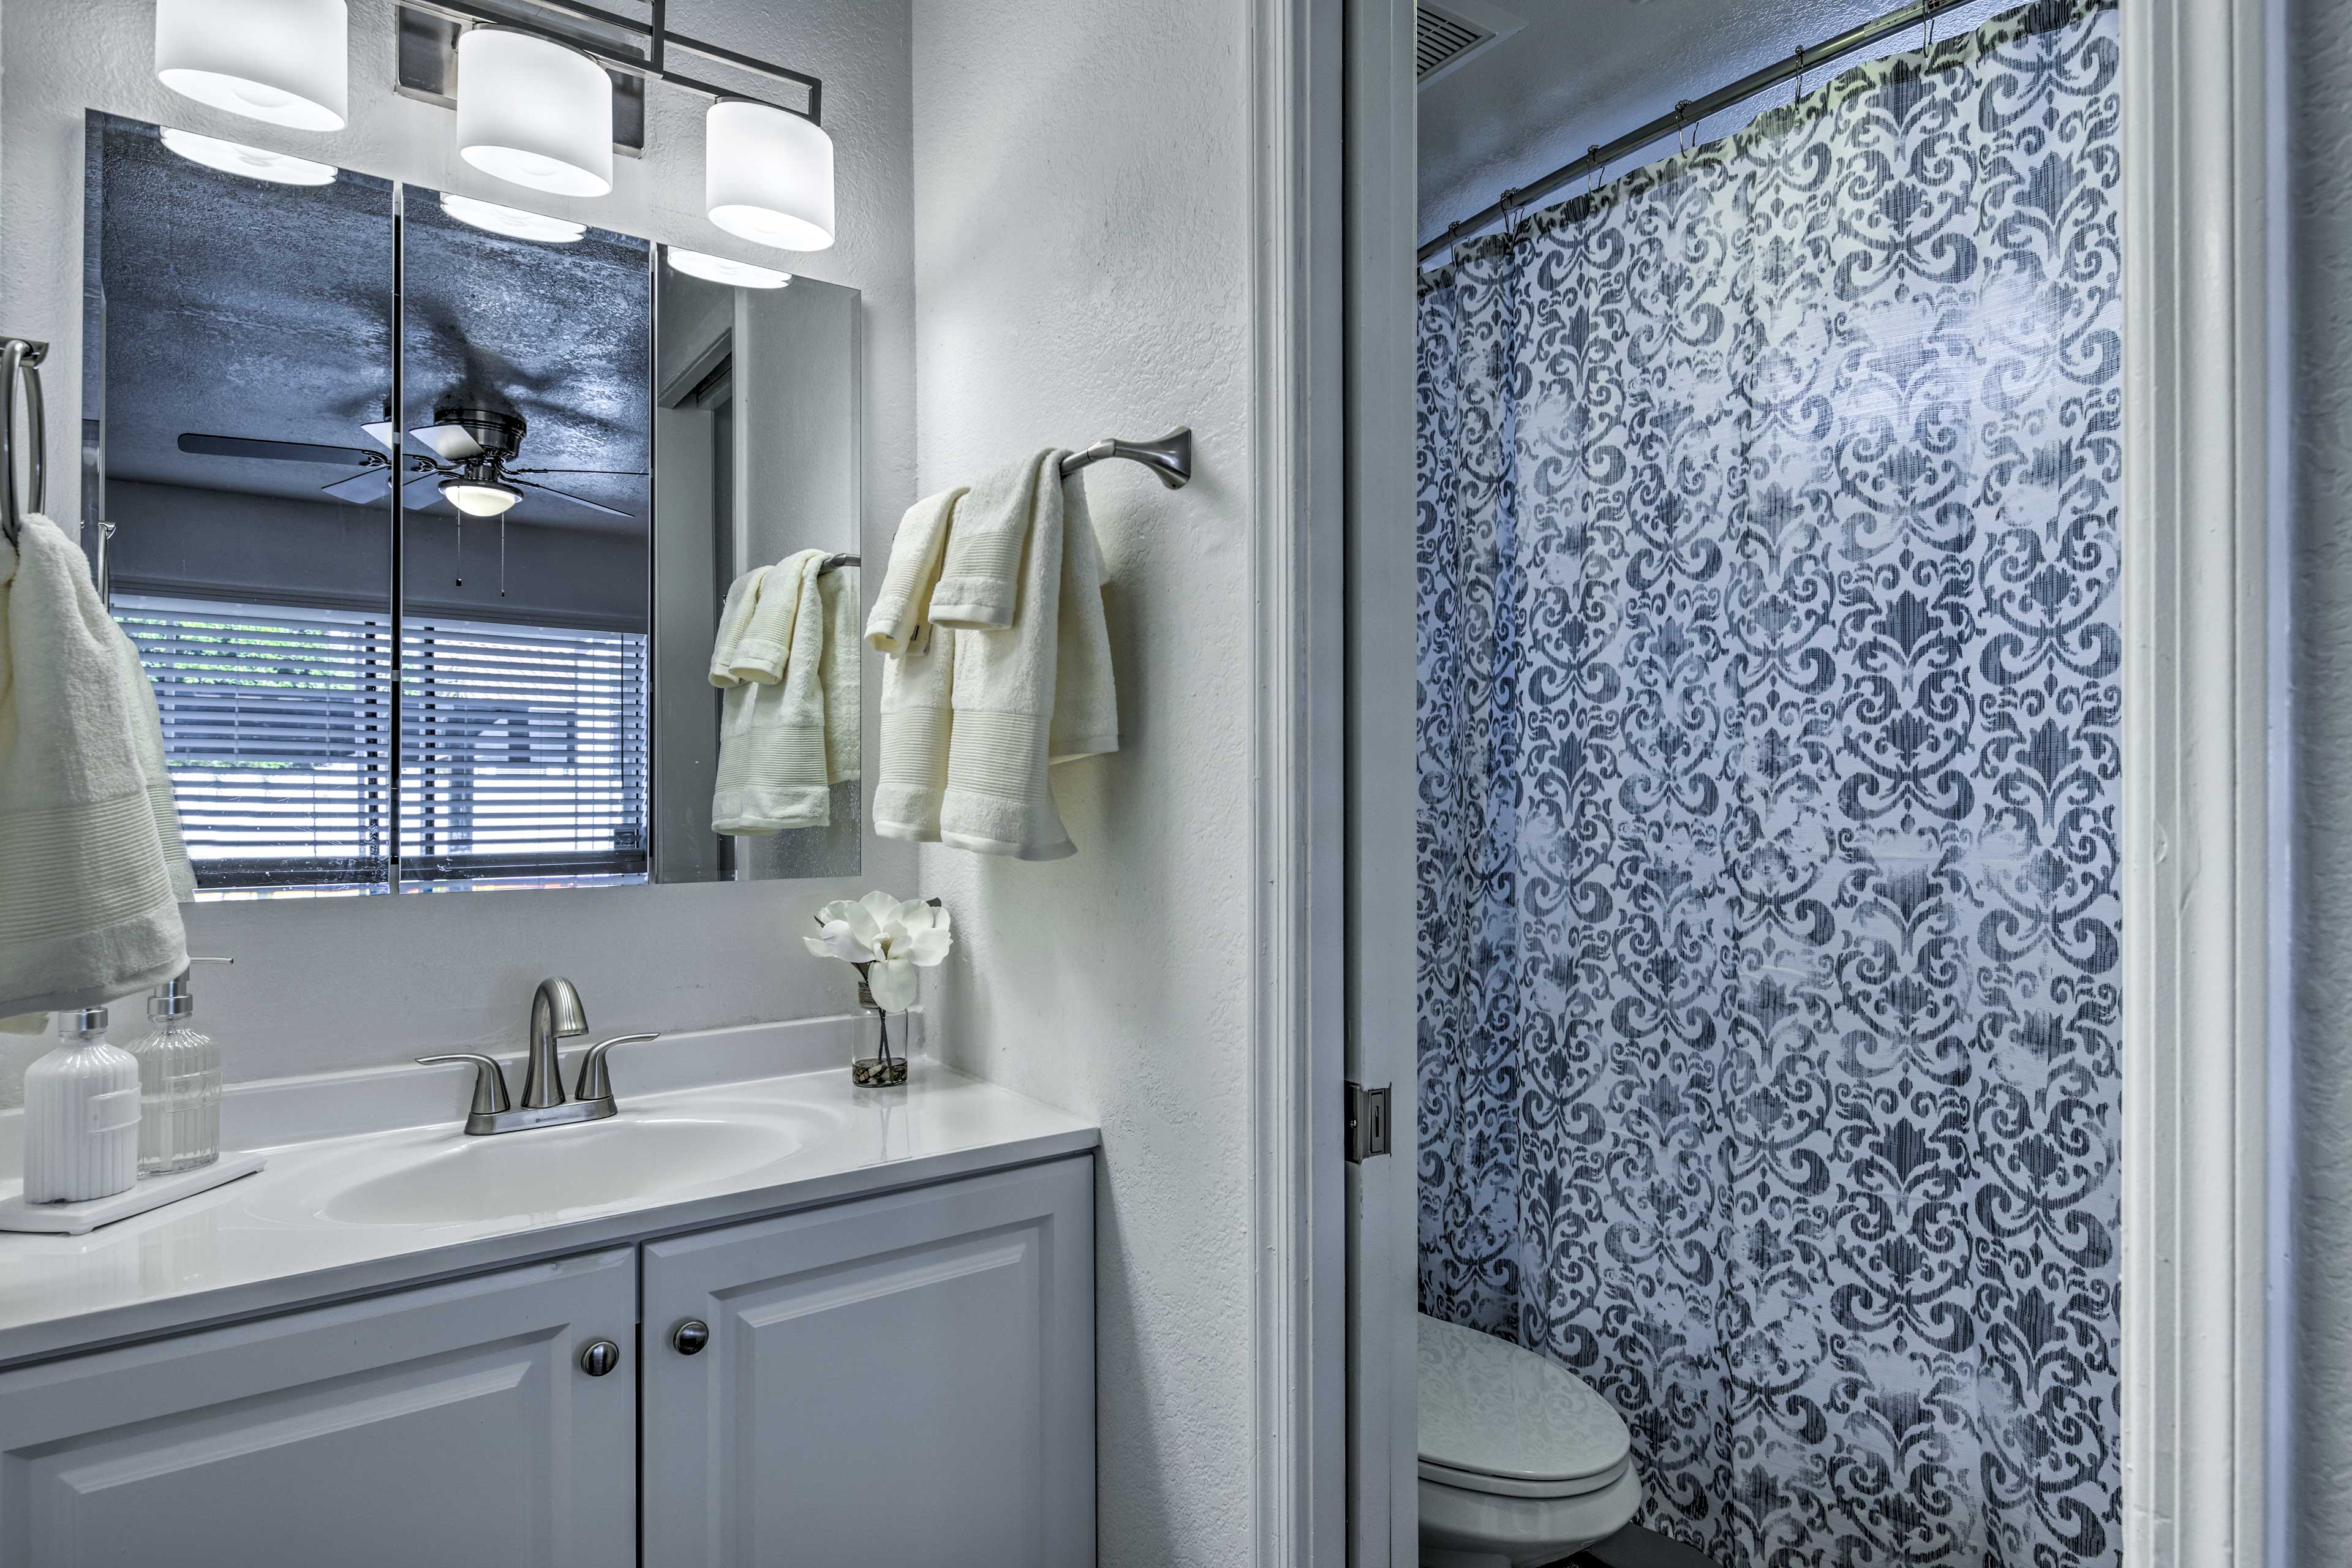 Full Bathroom | Towels Provided | Complimentary Toiletries | Walk-In Closet